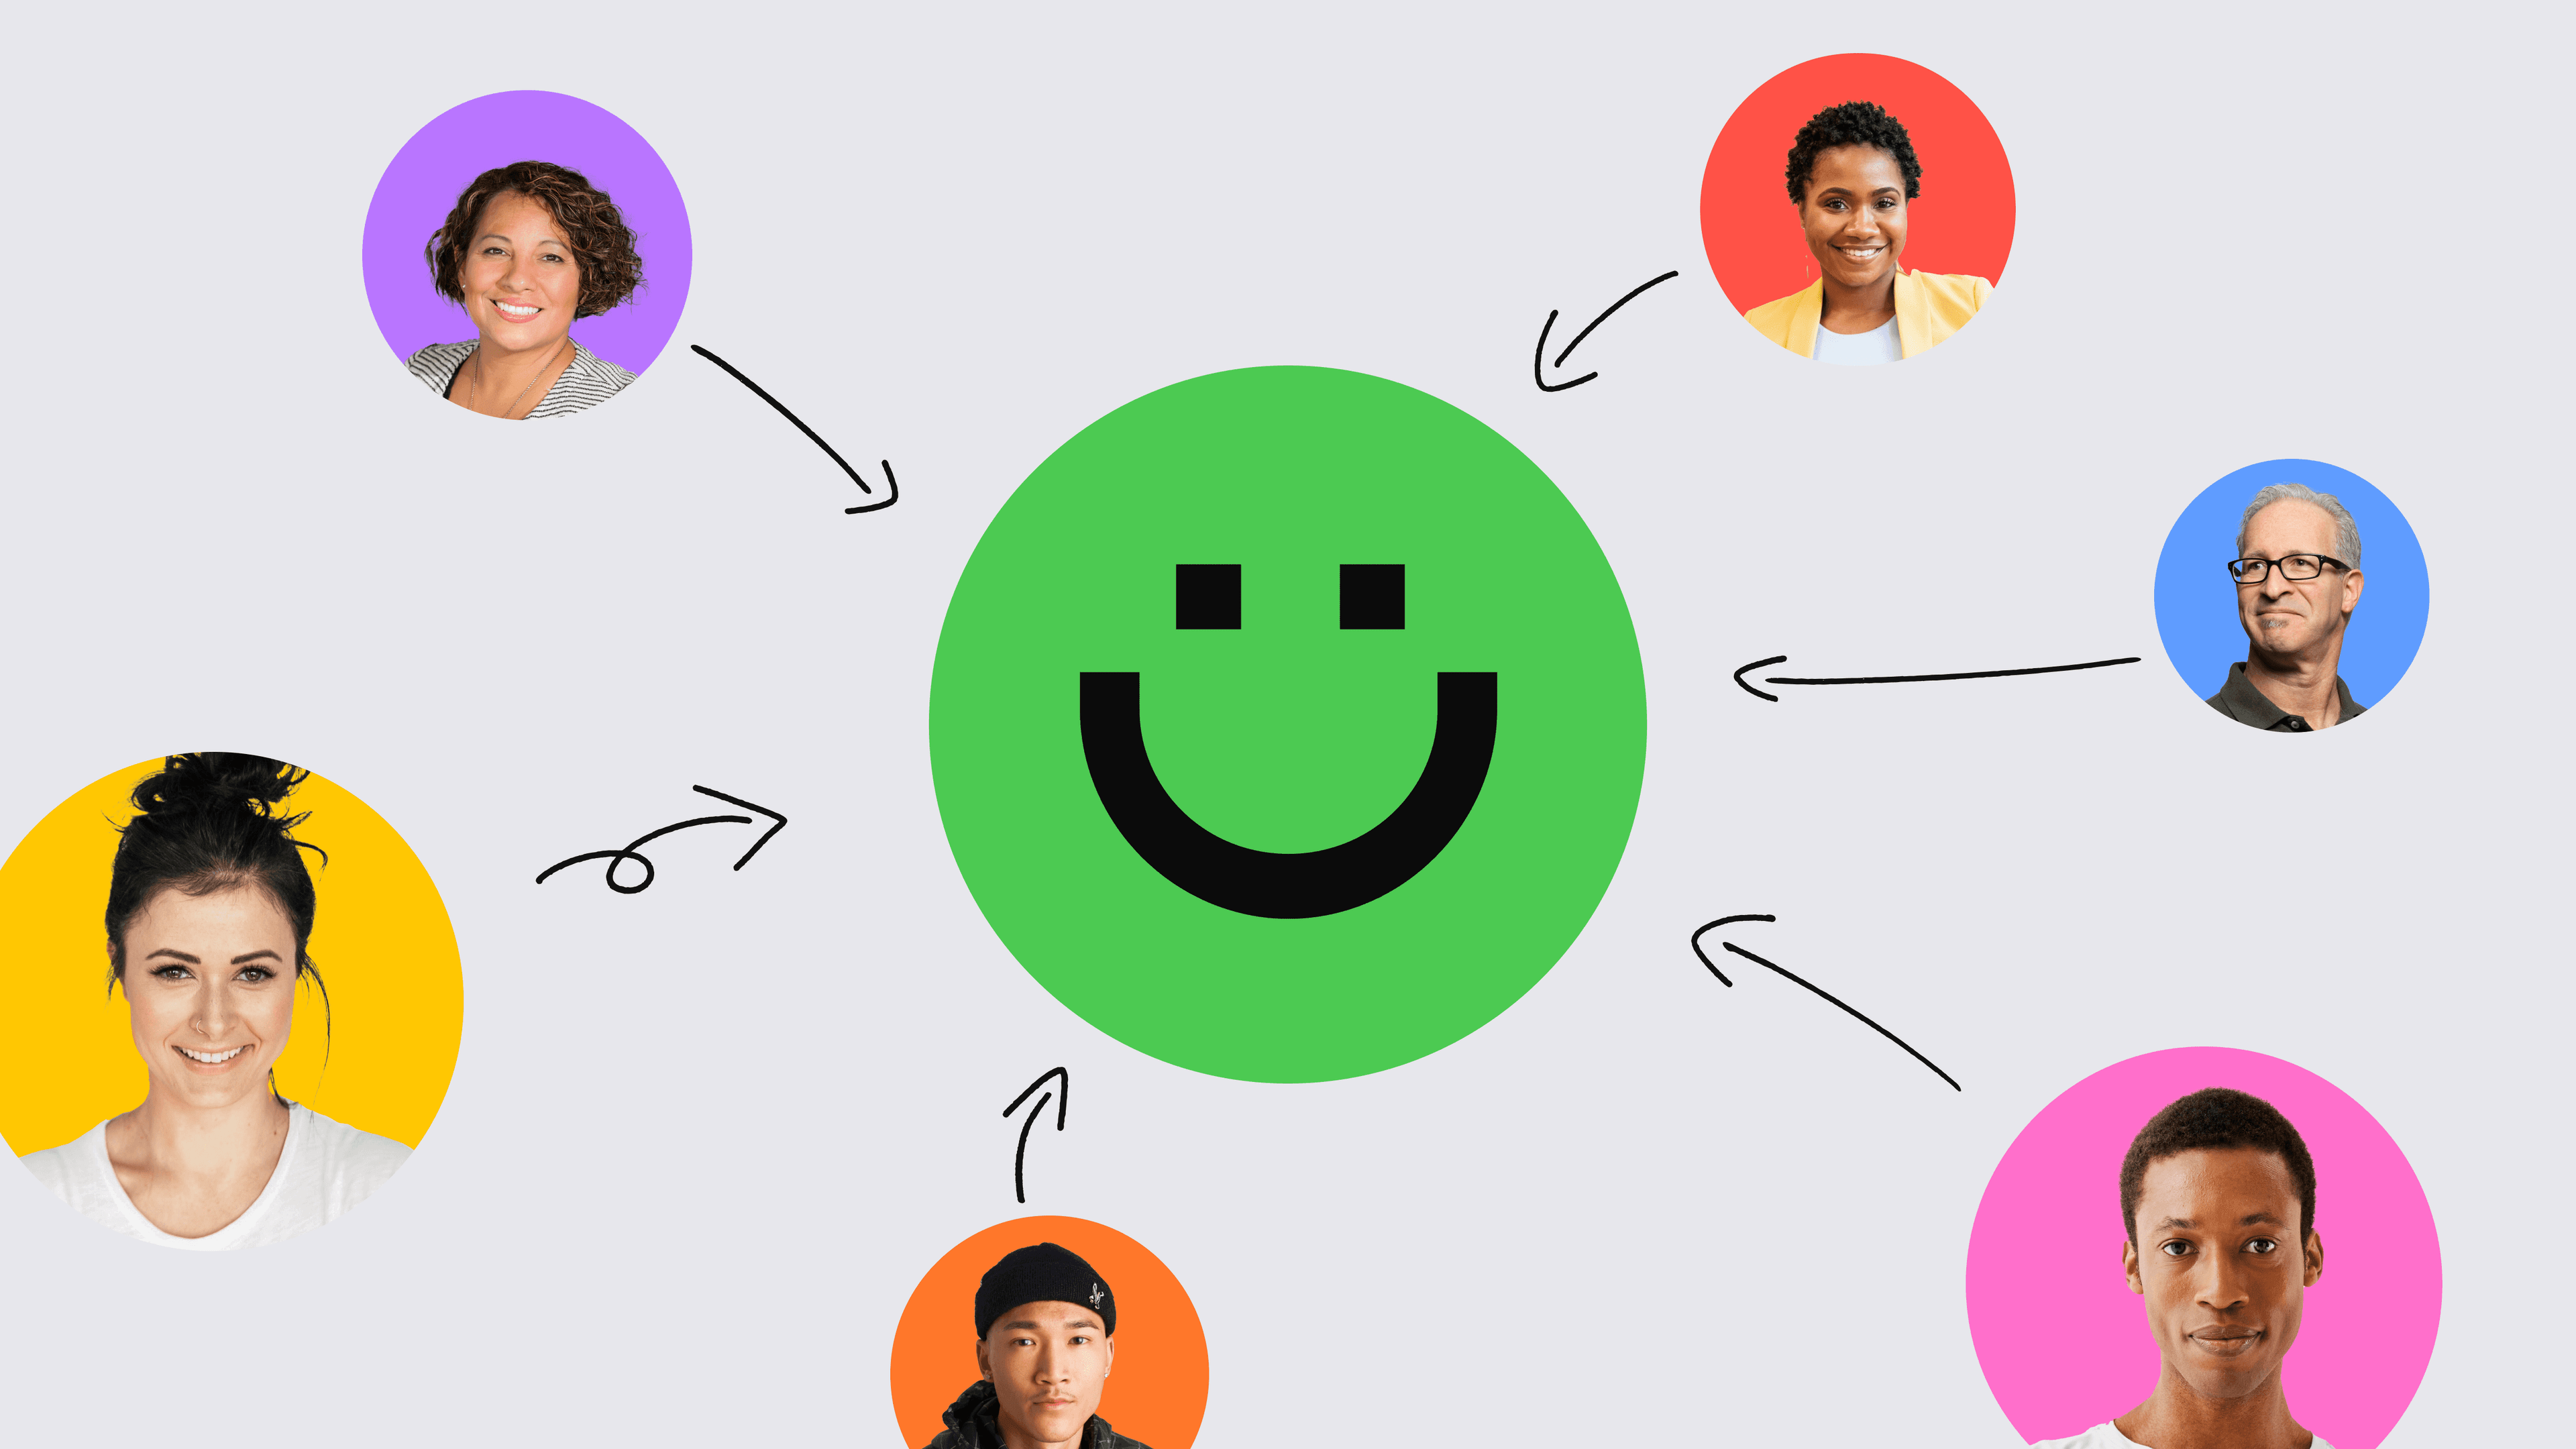 The Dandi smiley, surrounded by headshots of six different people, with arrows pointing from each to the central logo.